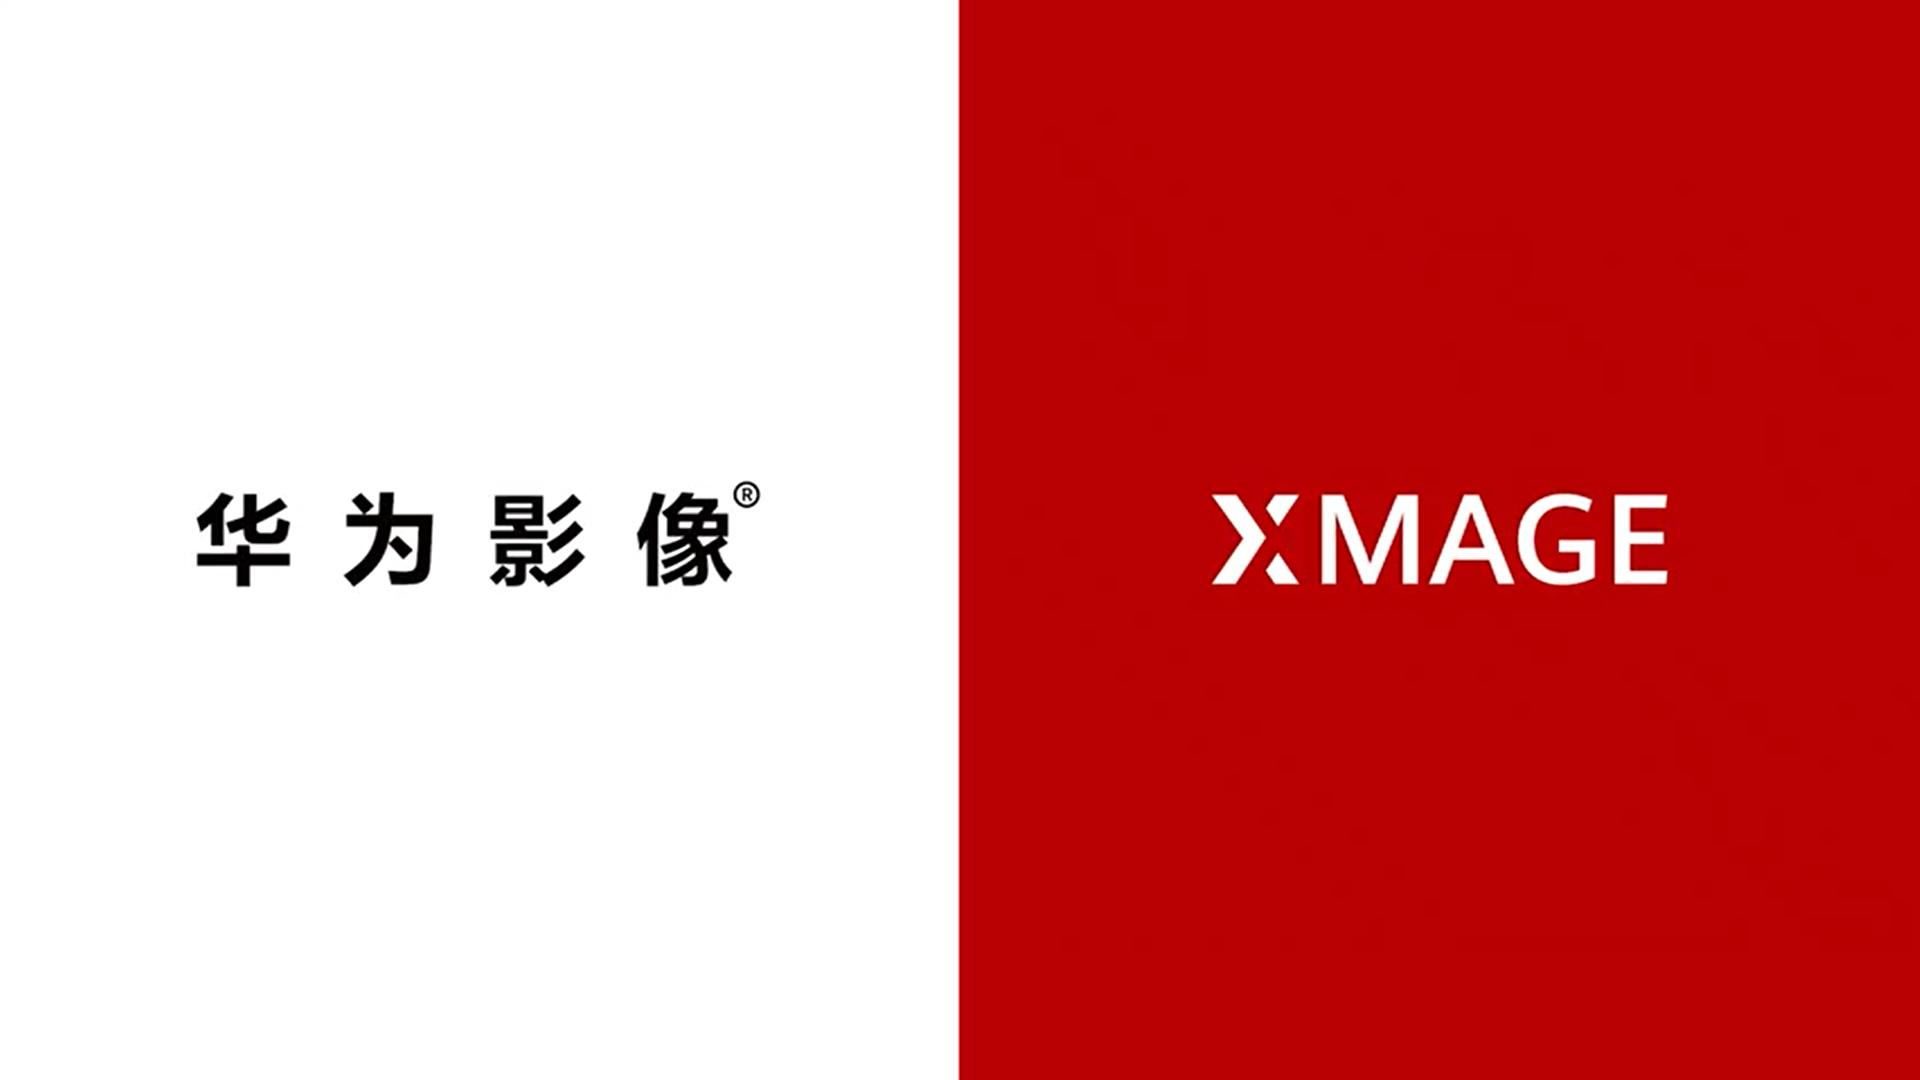 Huawei launches the new XMAGE brand to compensate for the loss of its Leica mobile camera partnership - NotebookCheck.net News